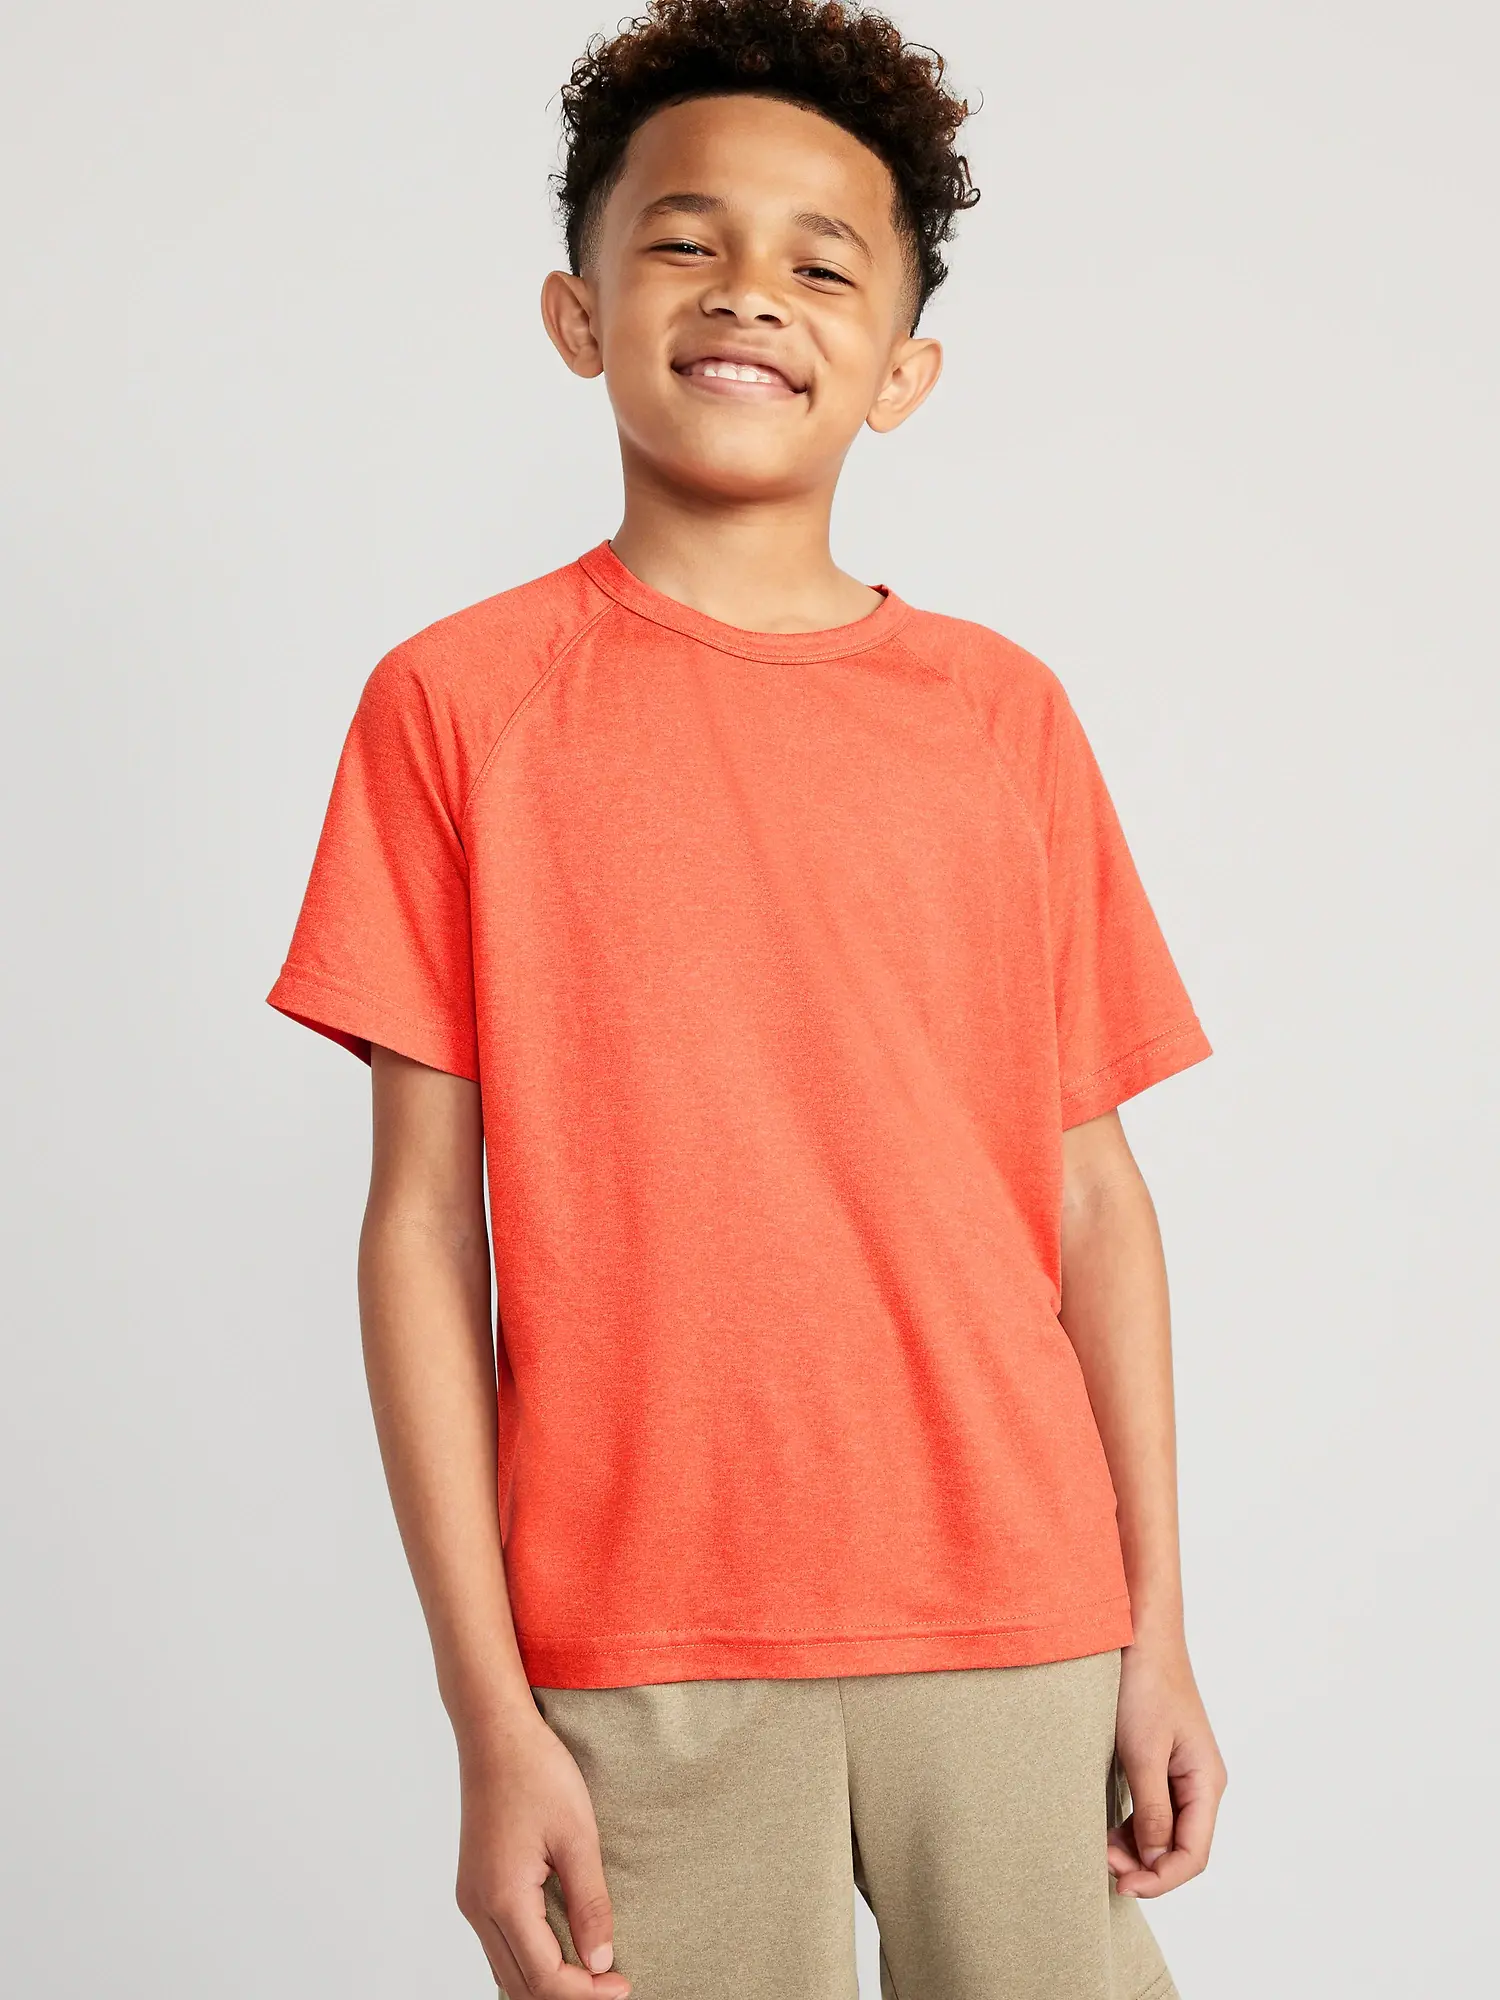 Old Navy Cloud 94 Soft Go-Dry Cool Performance T-Shirt for Boys orange. 1